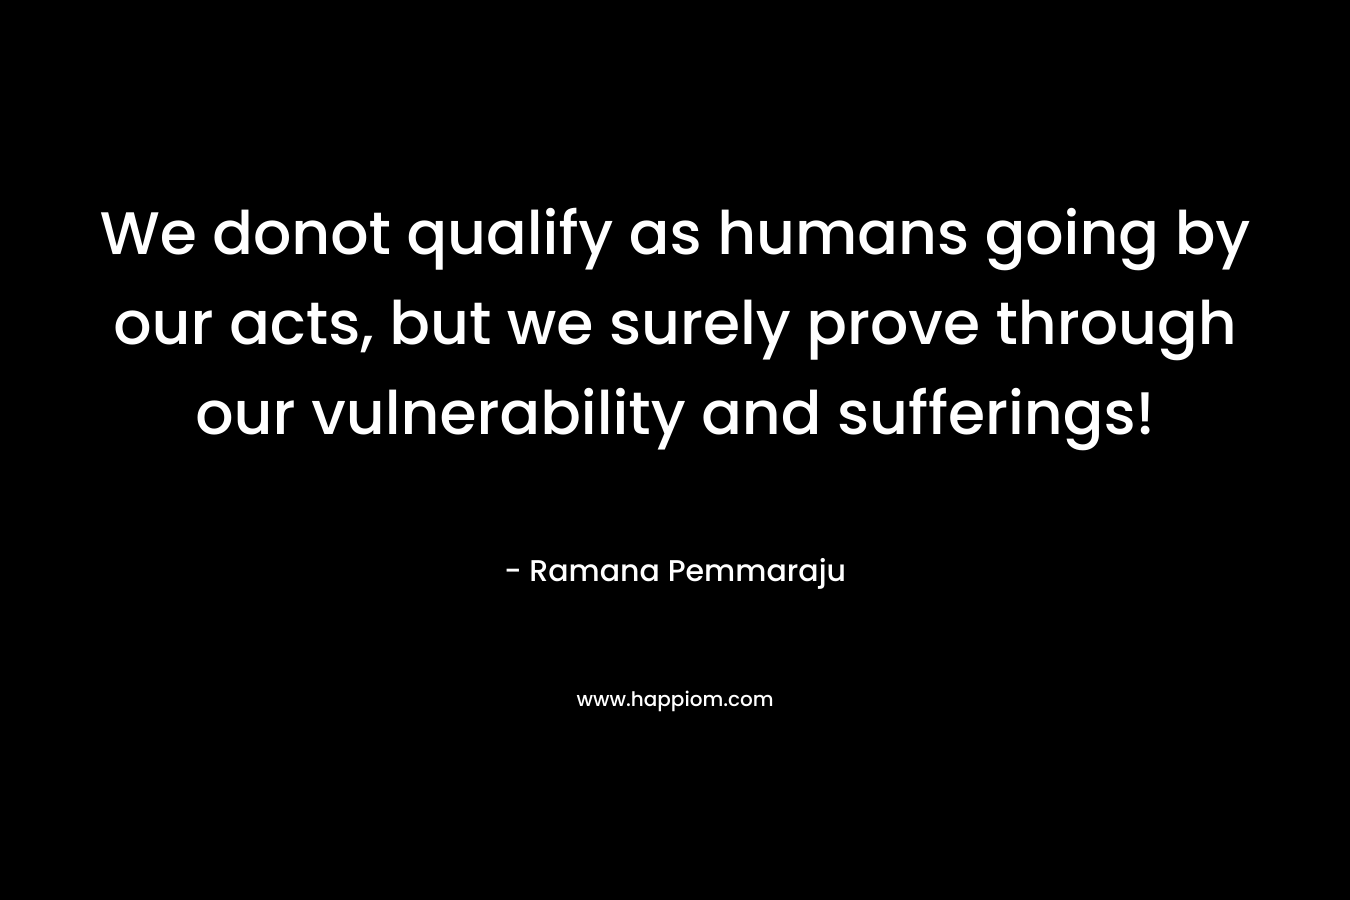 We donot qualify as humans going by our acts, but we surely prove through our vulnerability and sufferings! – Ramana Pemmaraju